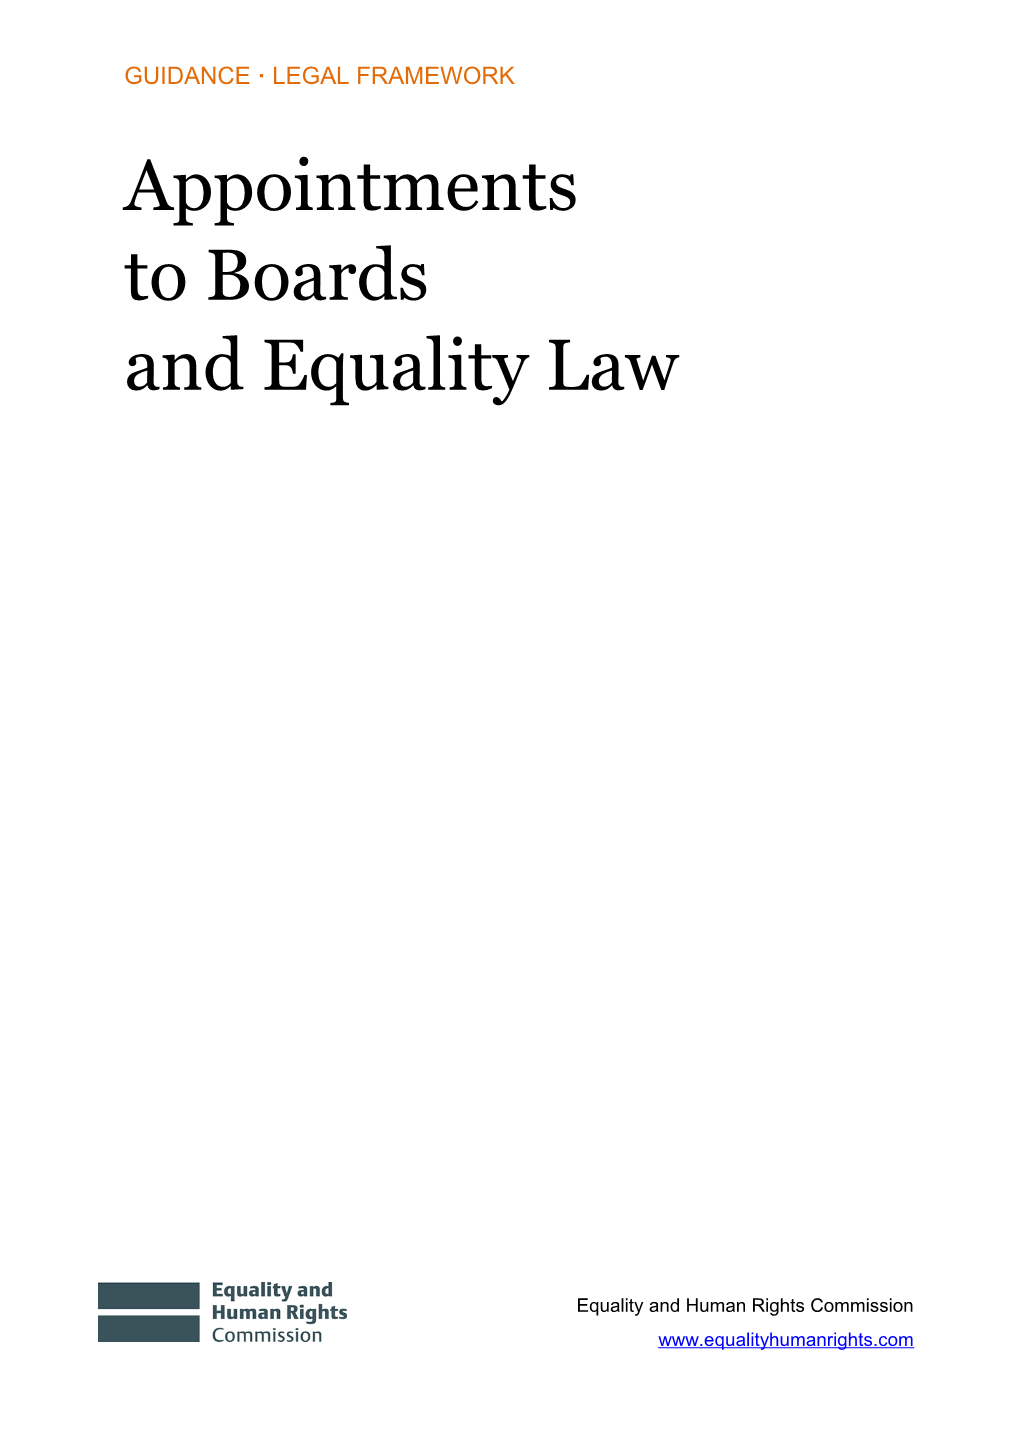 Appointments to Boards and Equality Law